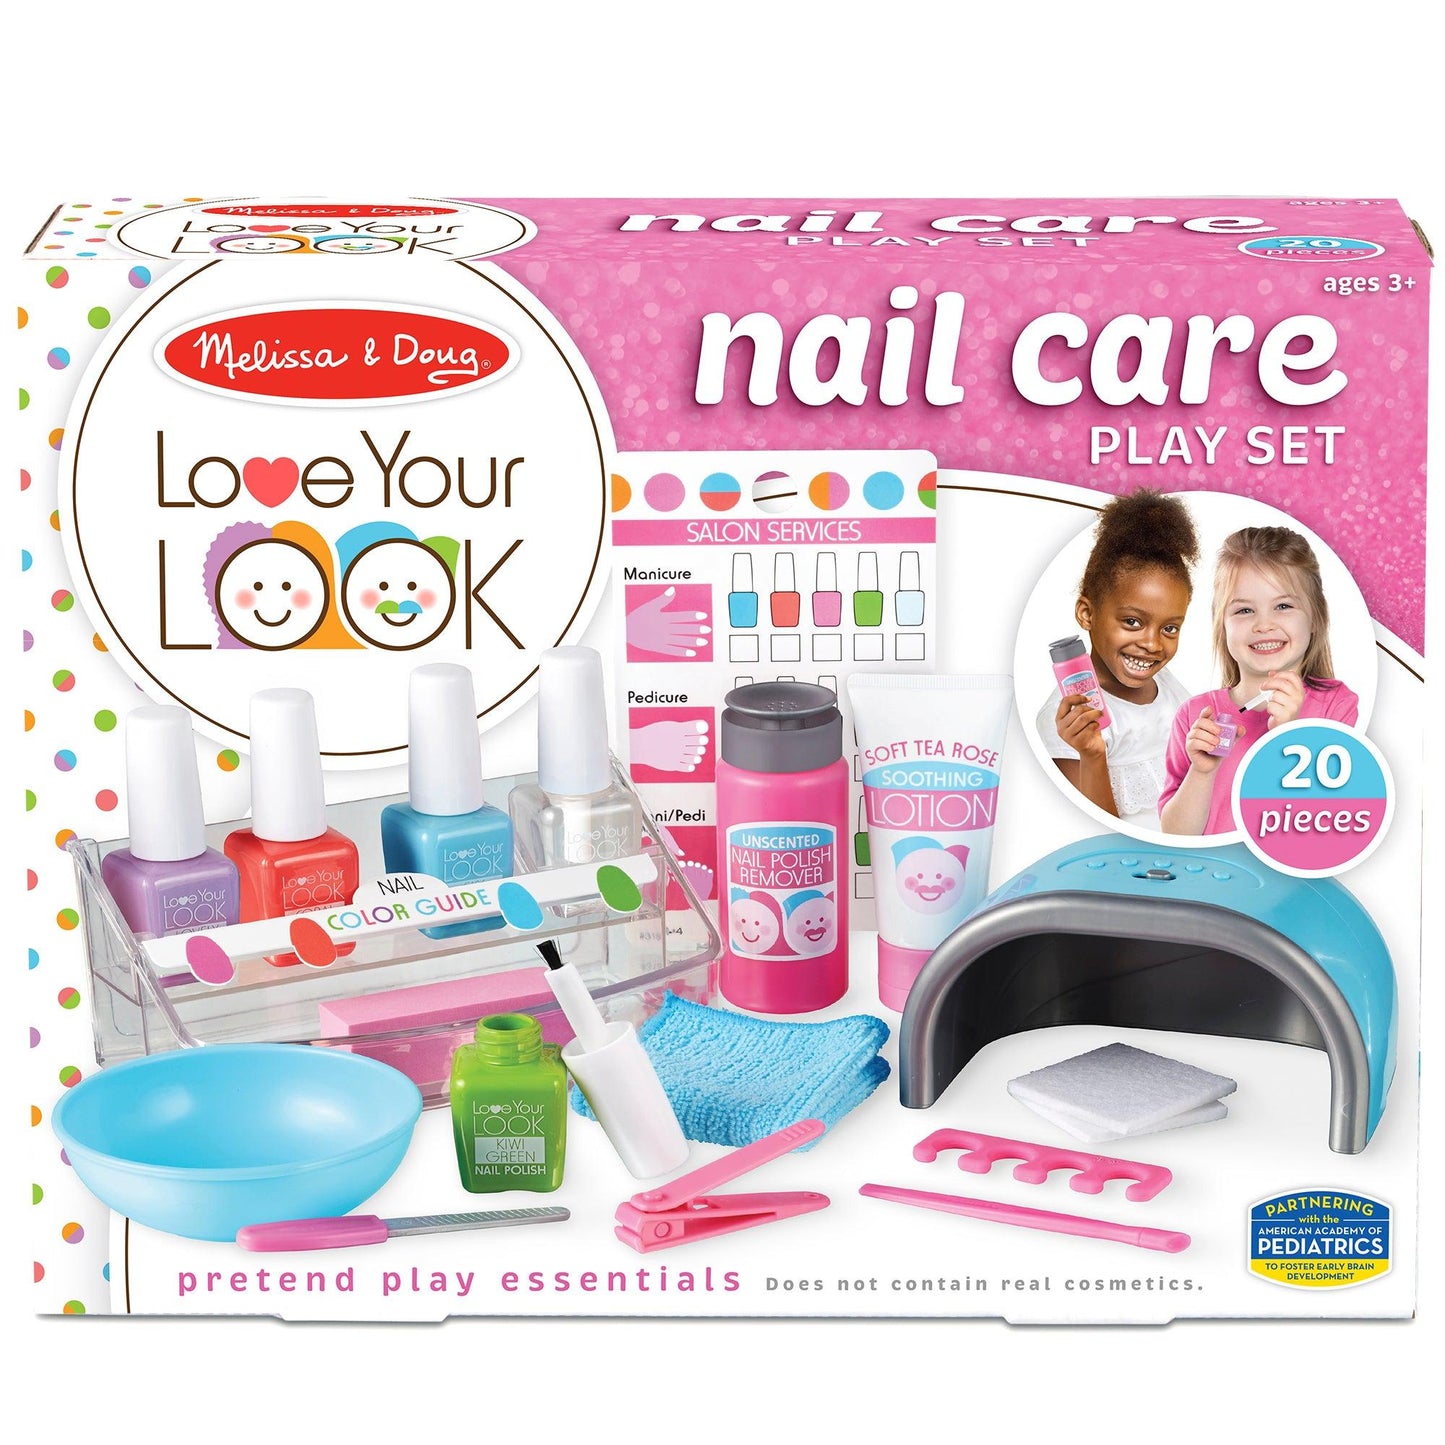 LOVE YOUR LOOK - Nail Care Play Set - Loomini